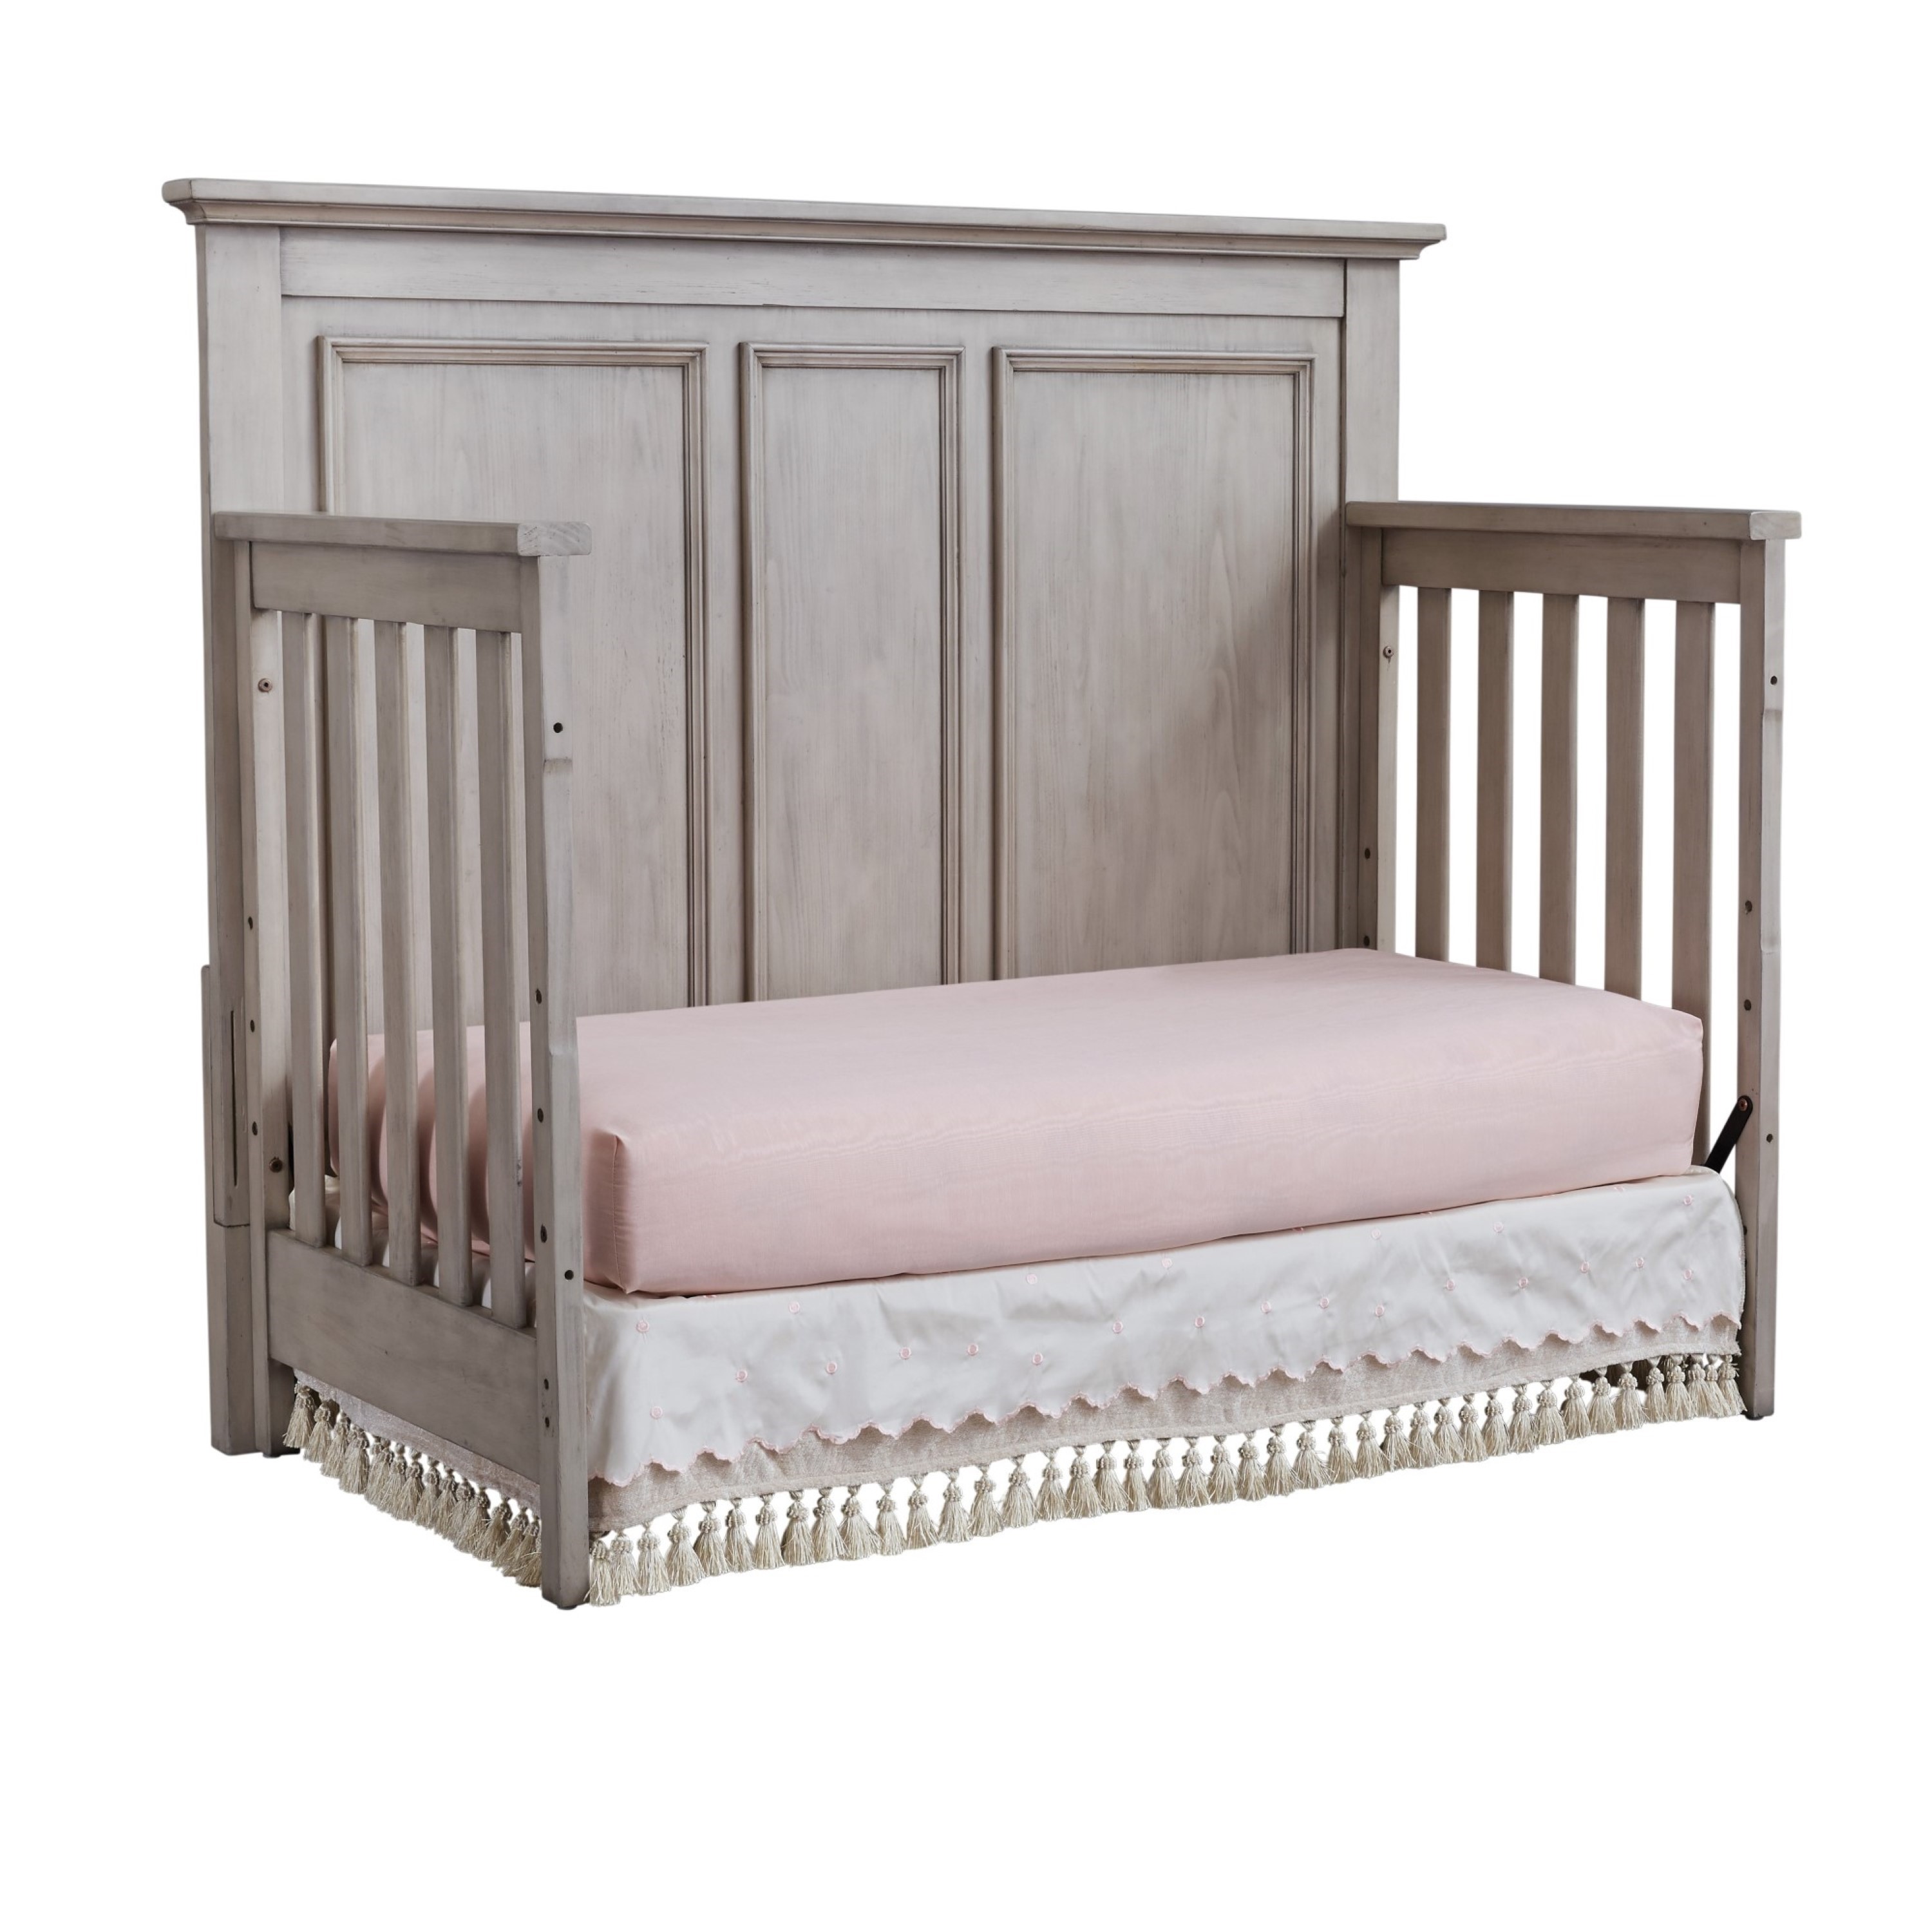 Oxford Baby Kenilworth 4-in-1 Convertible Crib, Stone Wash, GREENGUARD Gold Certified, Wooden Crib - image 4 of 10